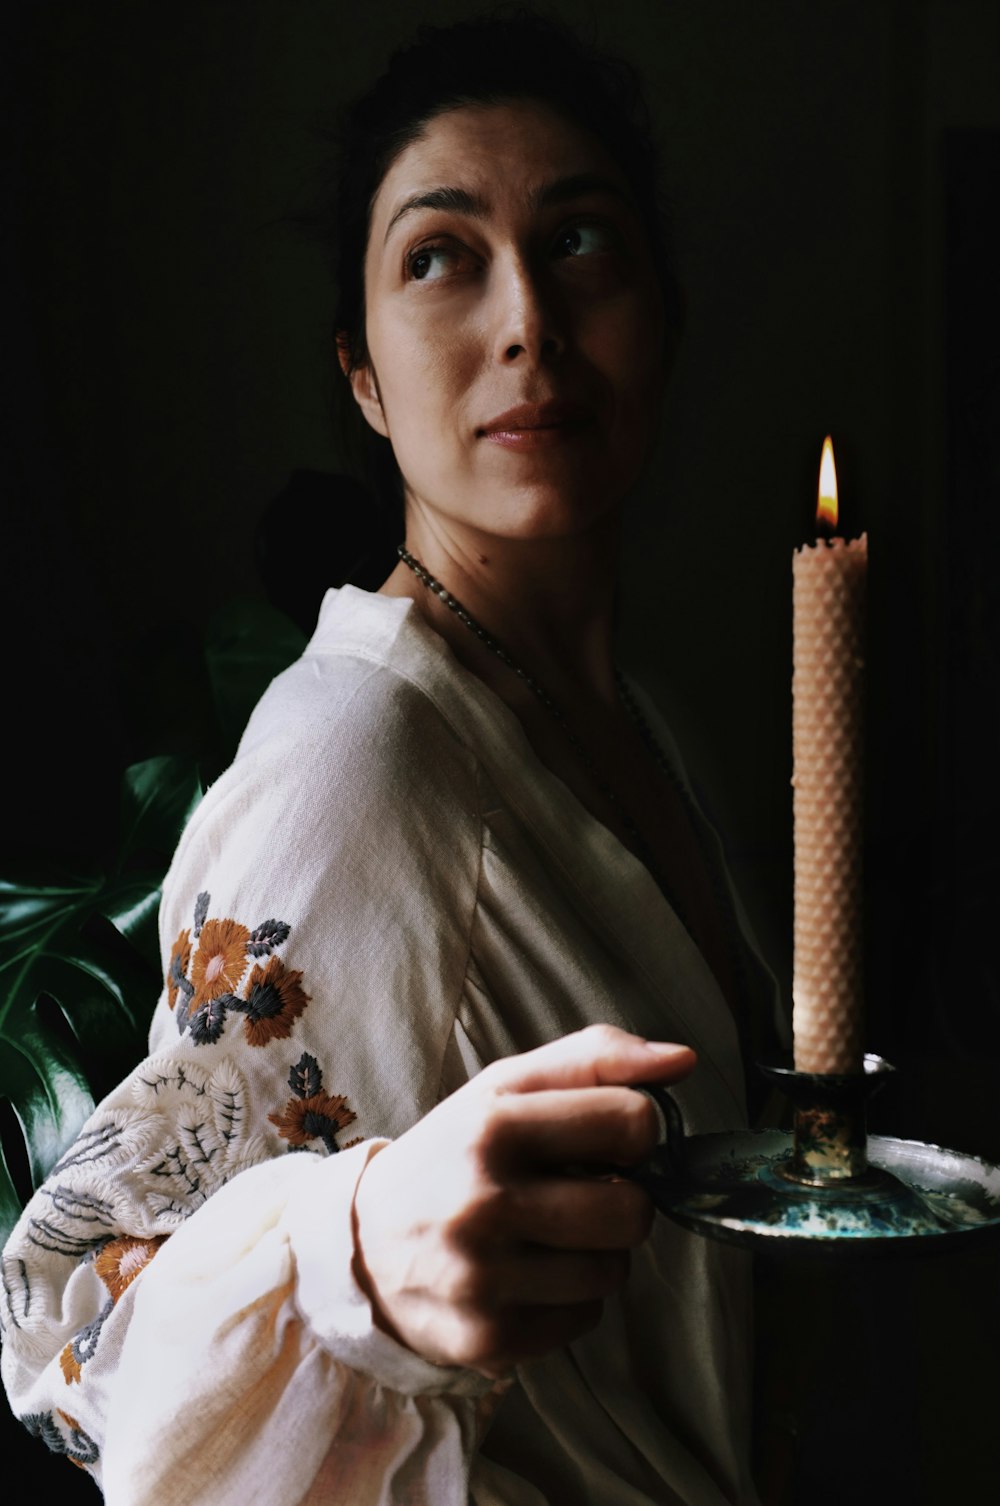 a woman holding a plate with a candle on it